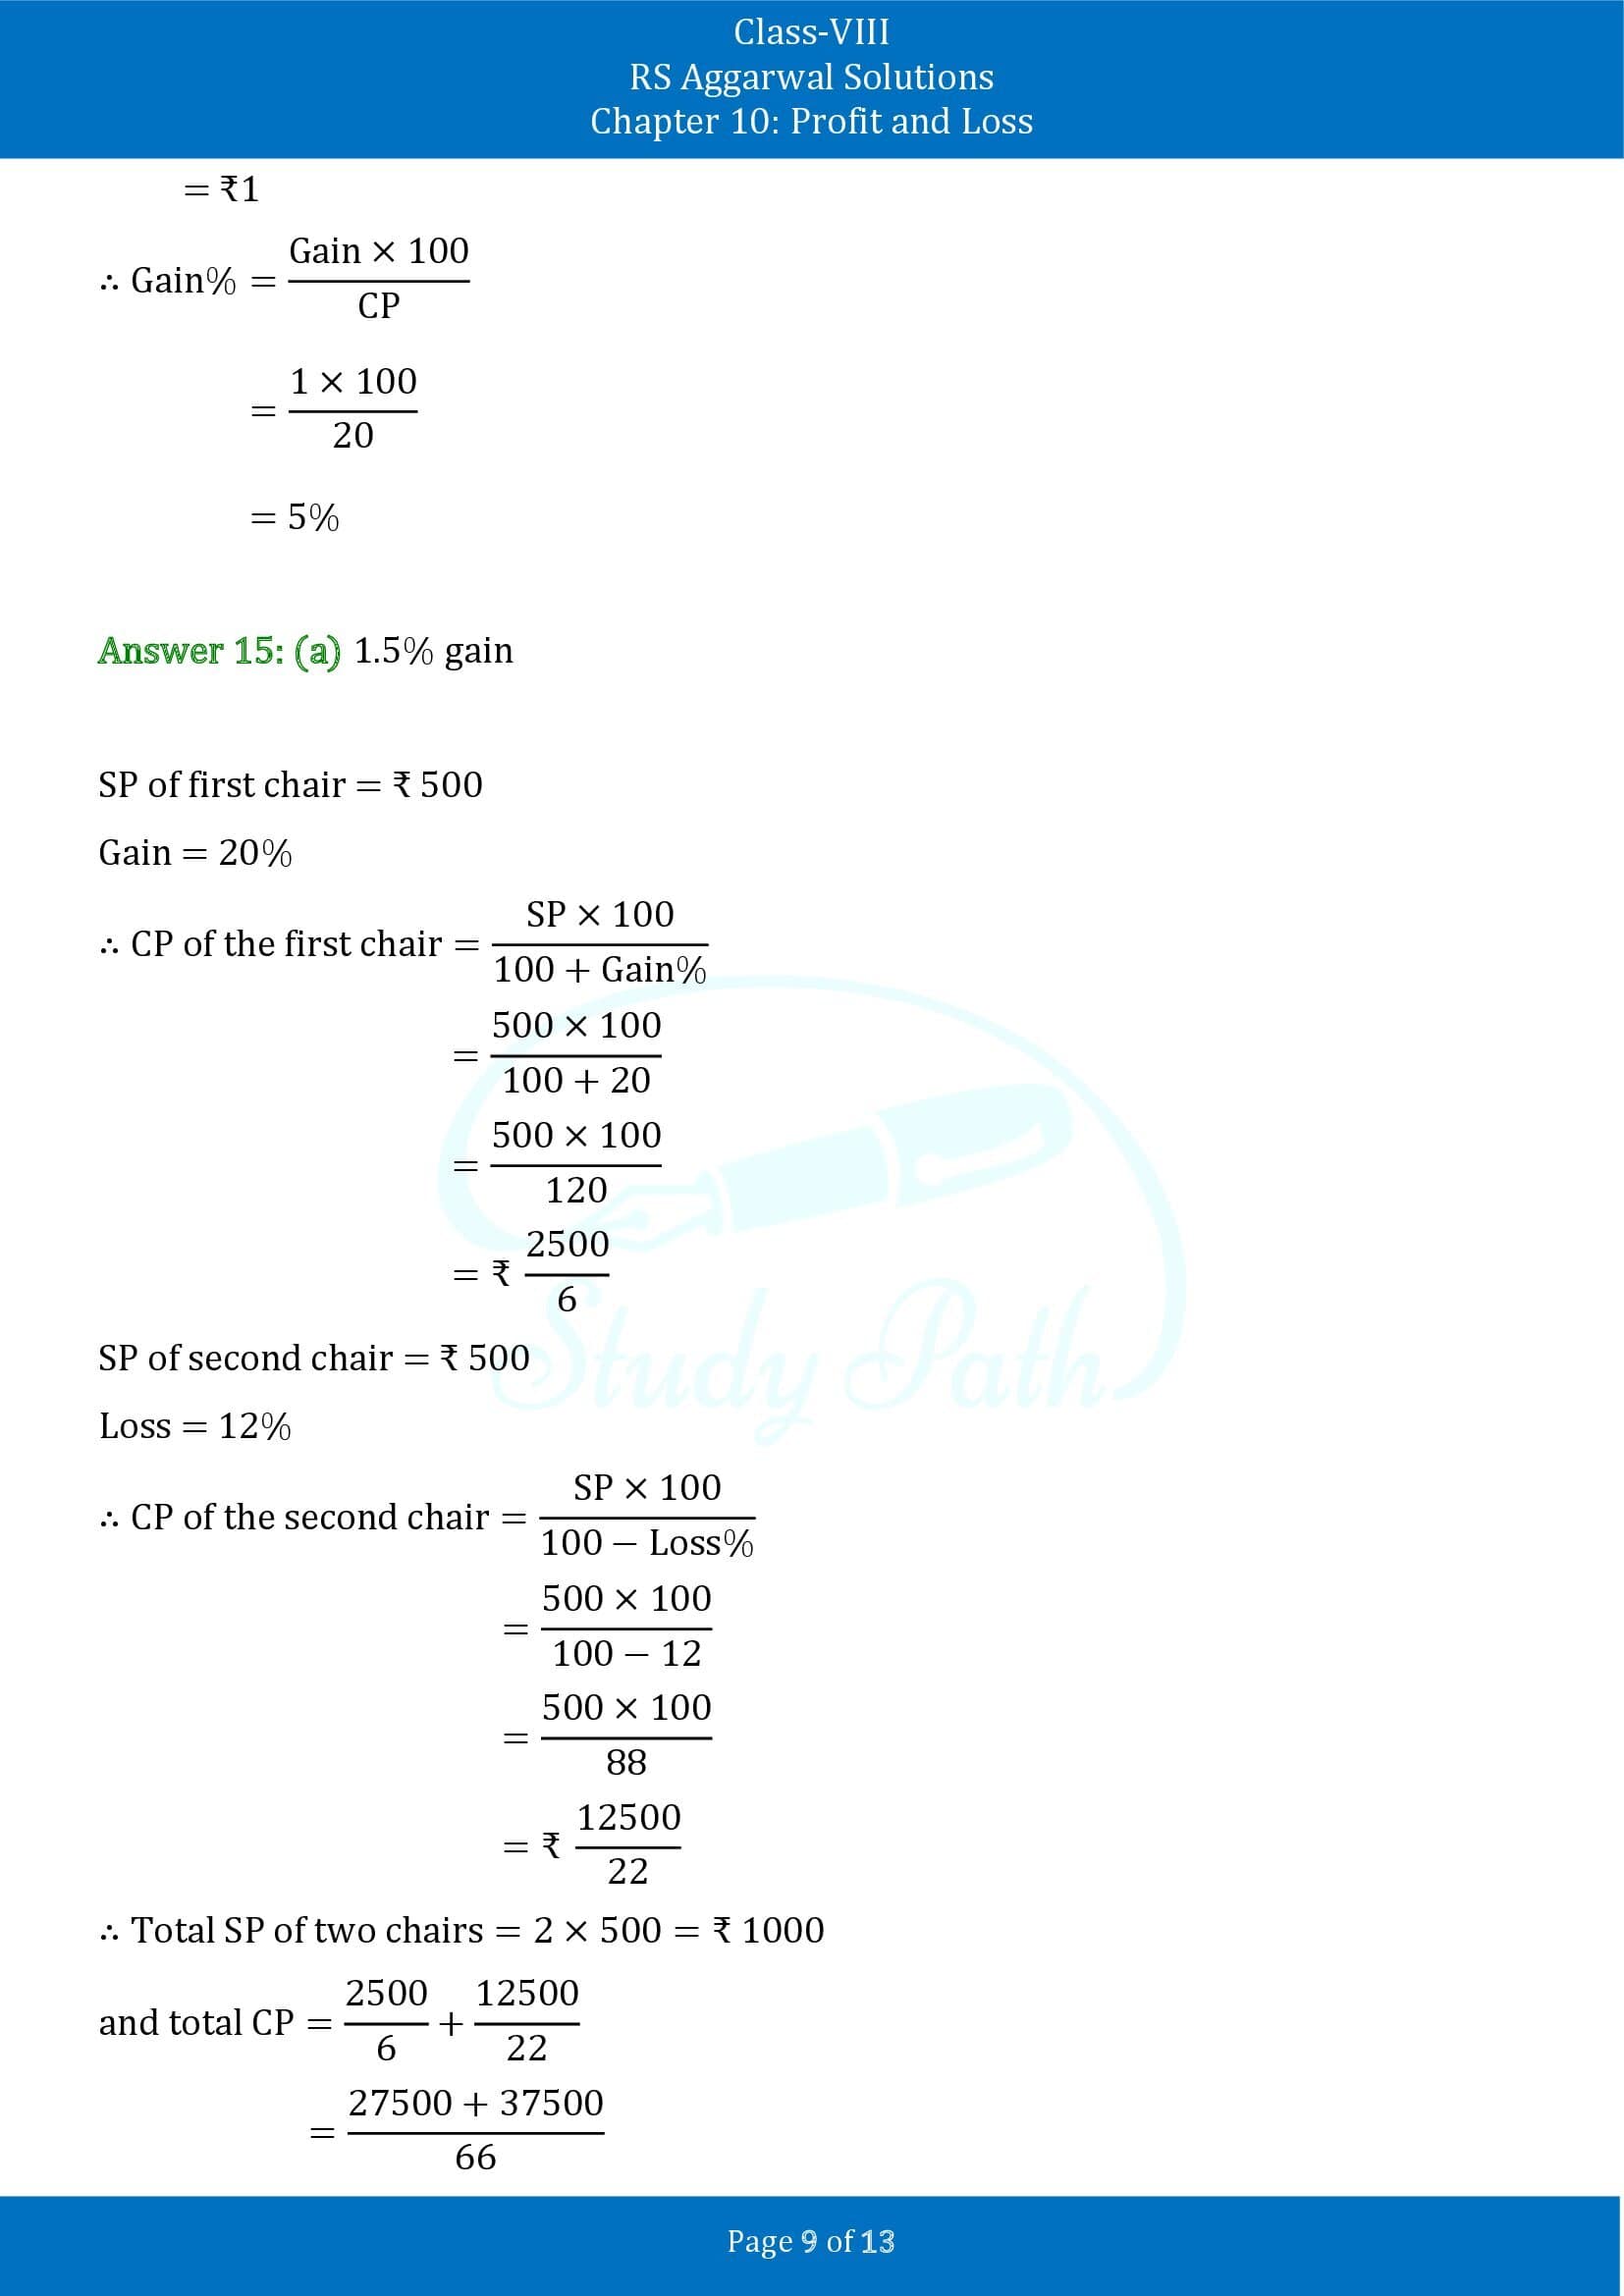 RS Aggarwal Solutions Class 8 Chapter 10 Profit and Loss Exercise 10D MCQs 00009